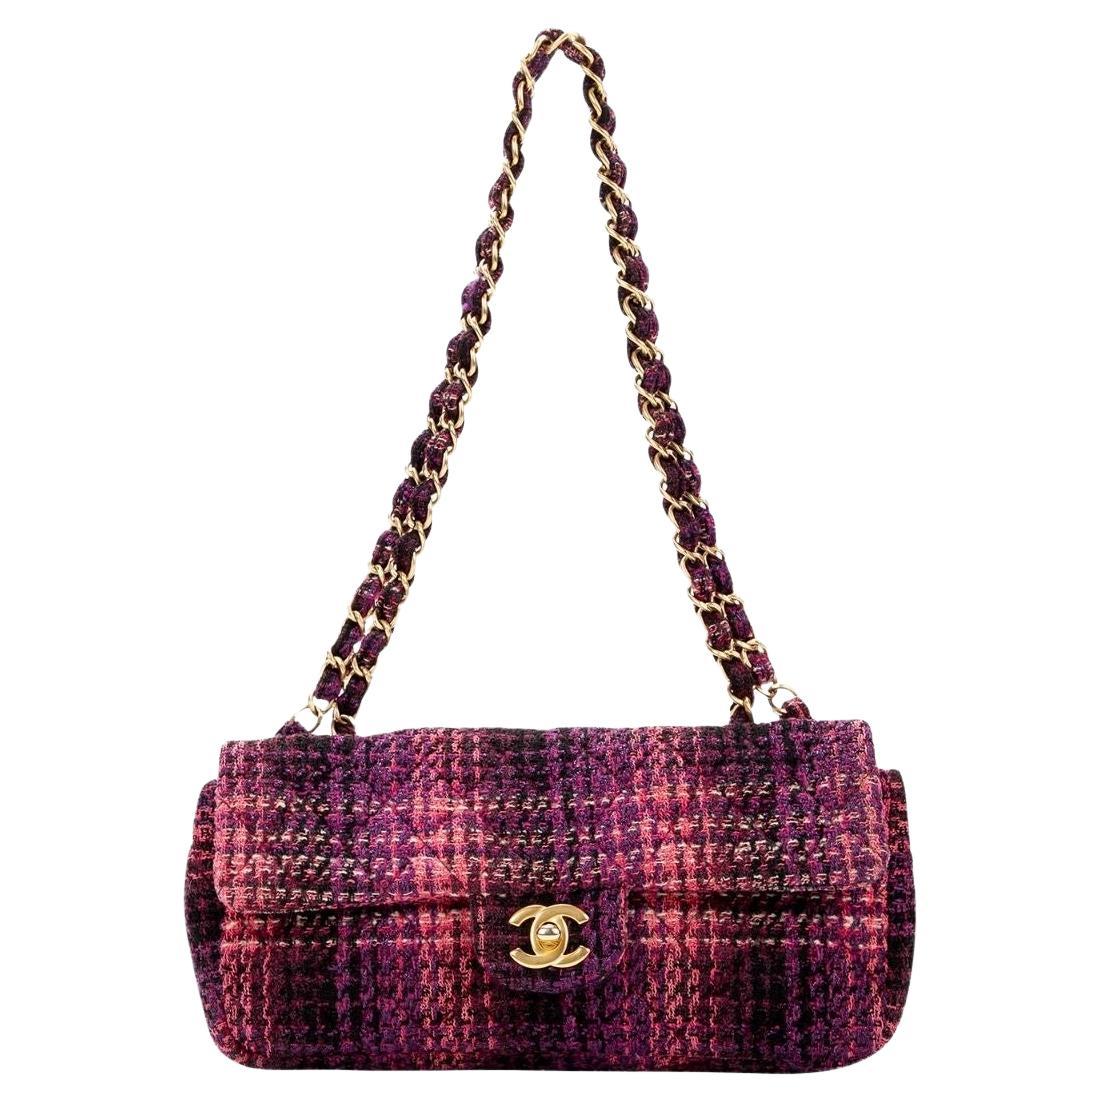 Chanel 2009 Limited Edition Pink Tweed East West Flap Bag For Sale